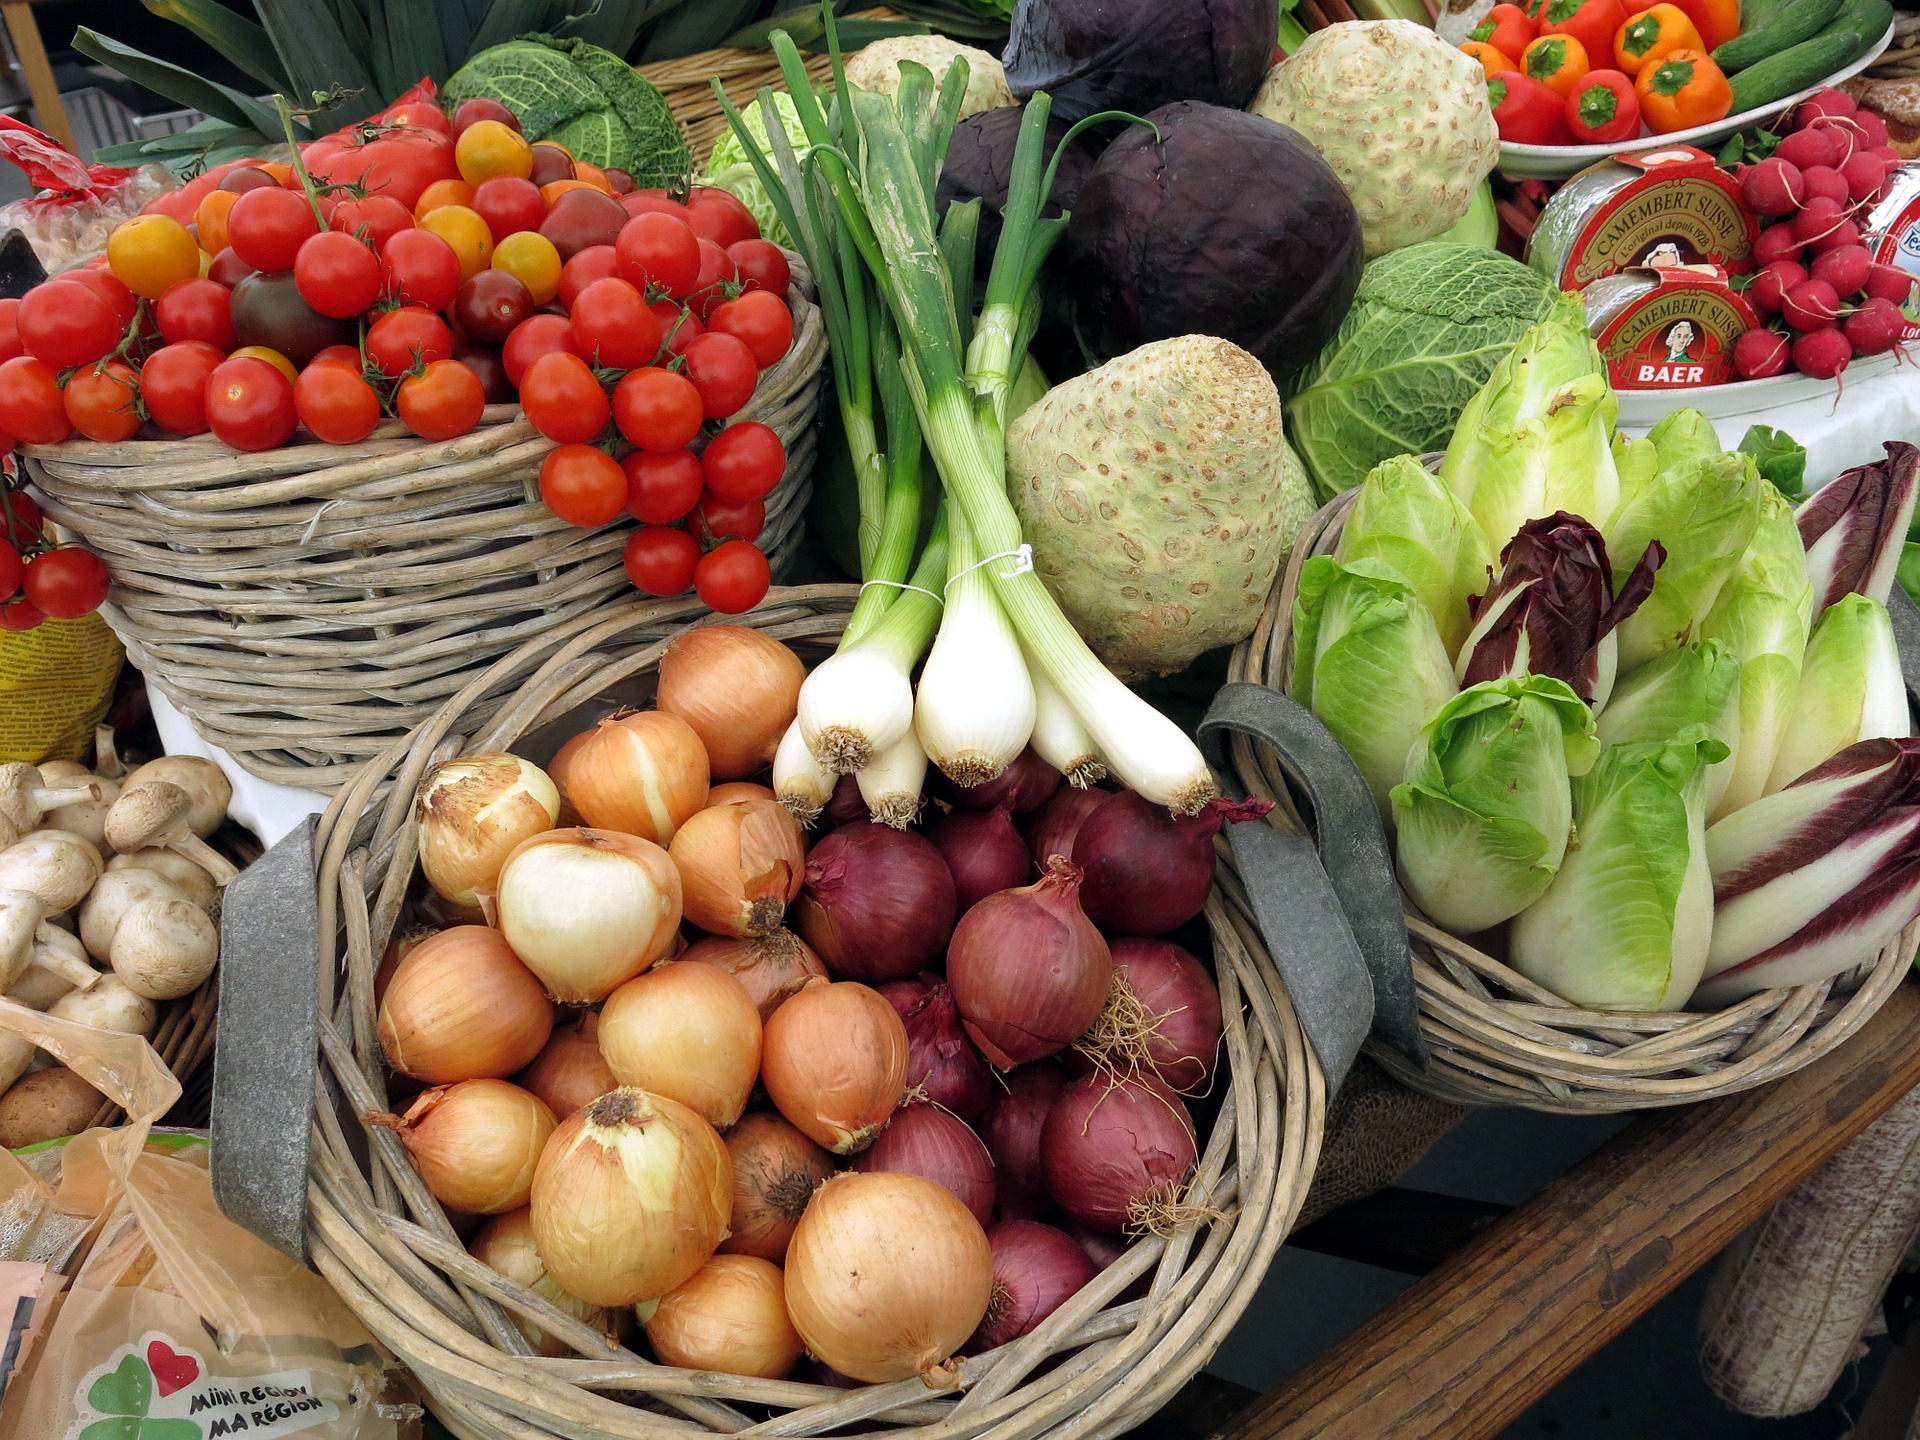 Farm produce to help represent agrifood